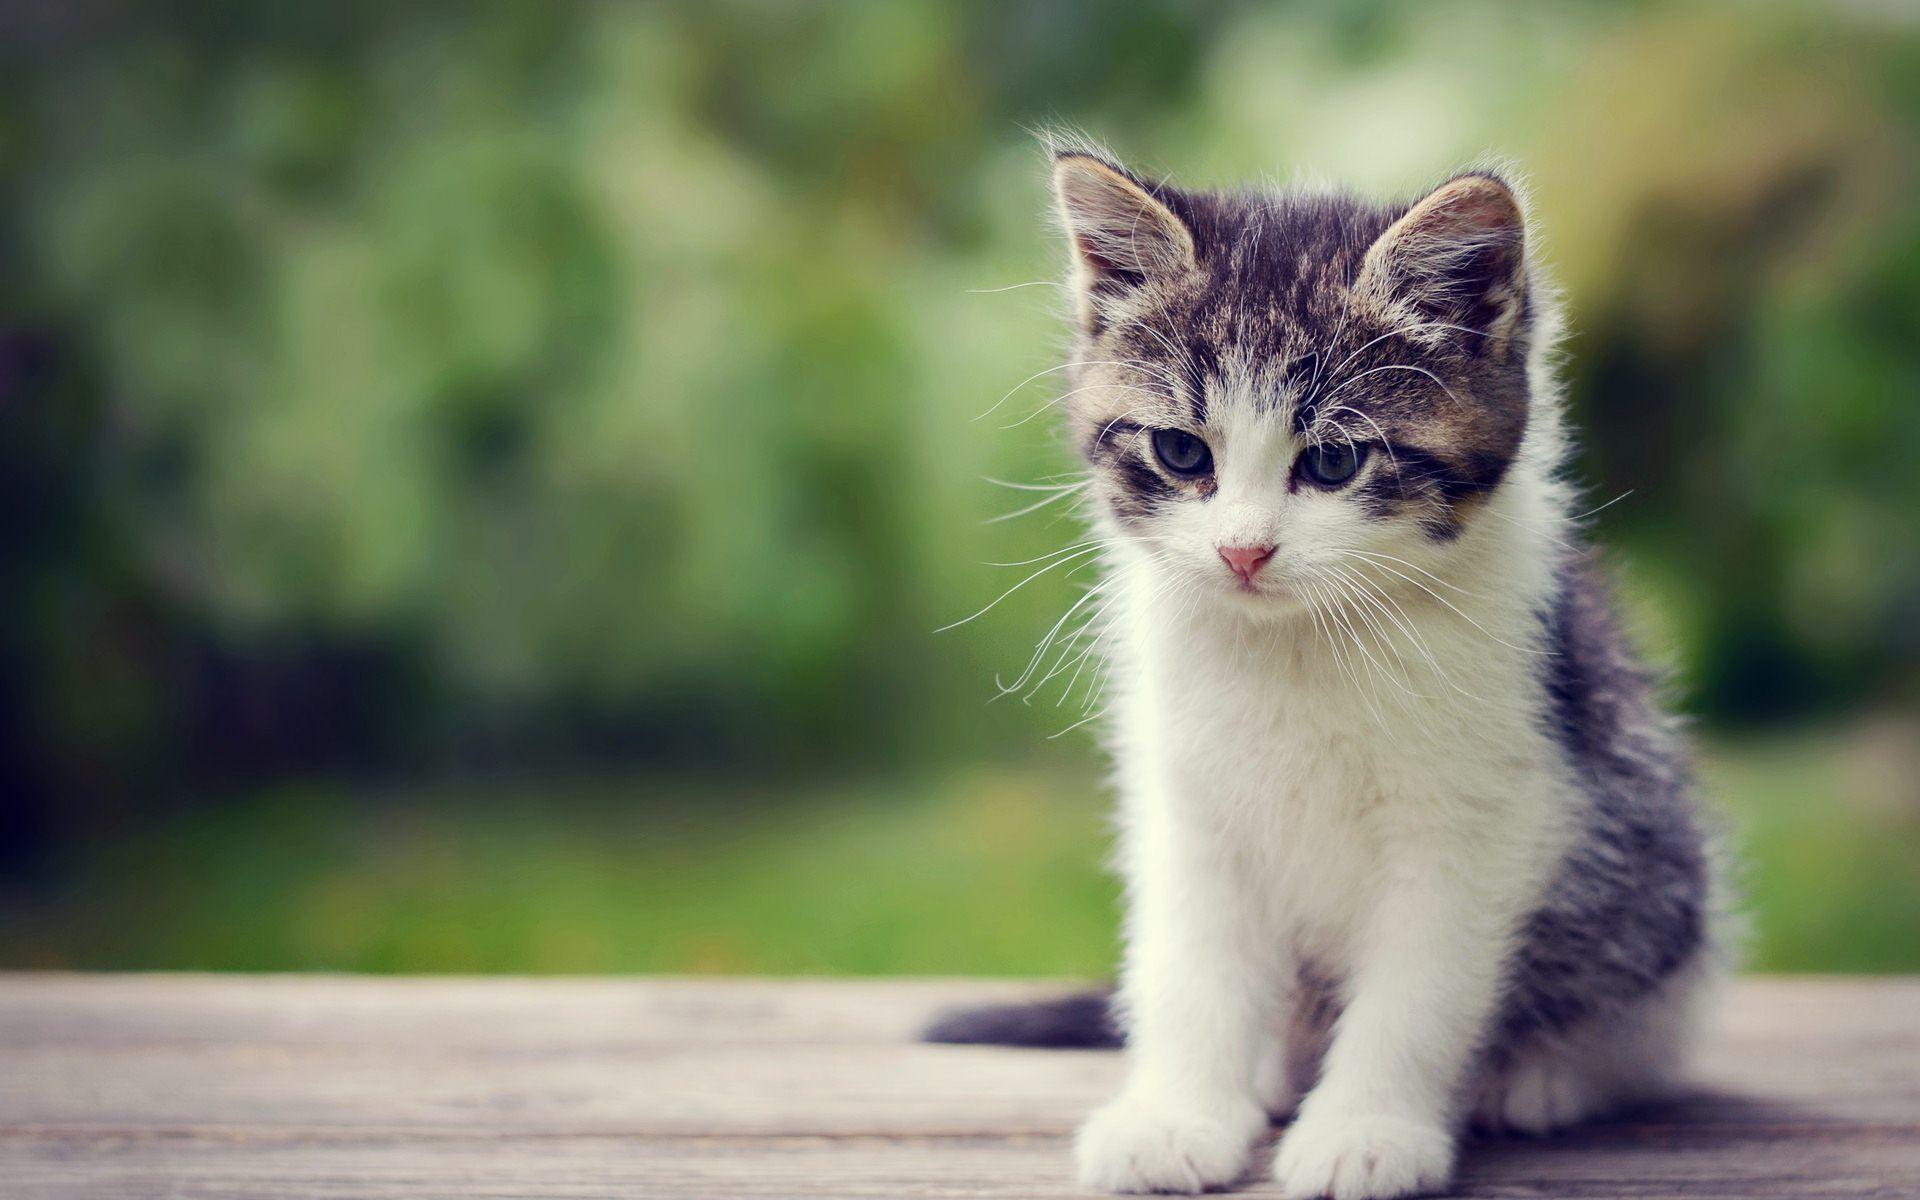 Cute Kittens Wallpapers For Mobile